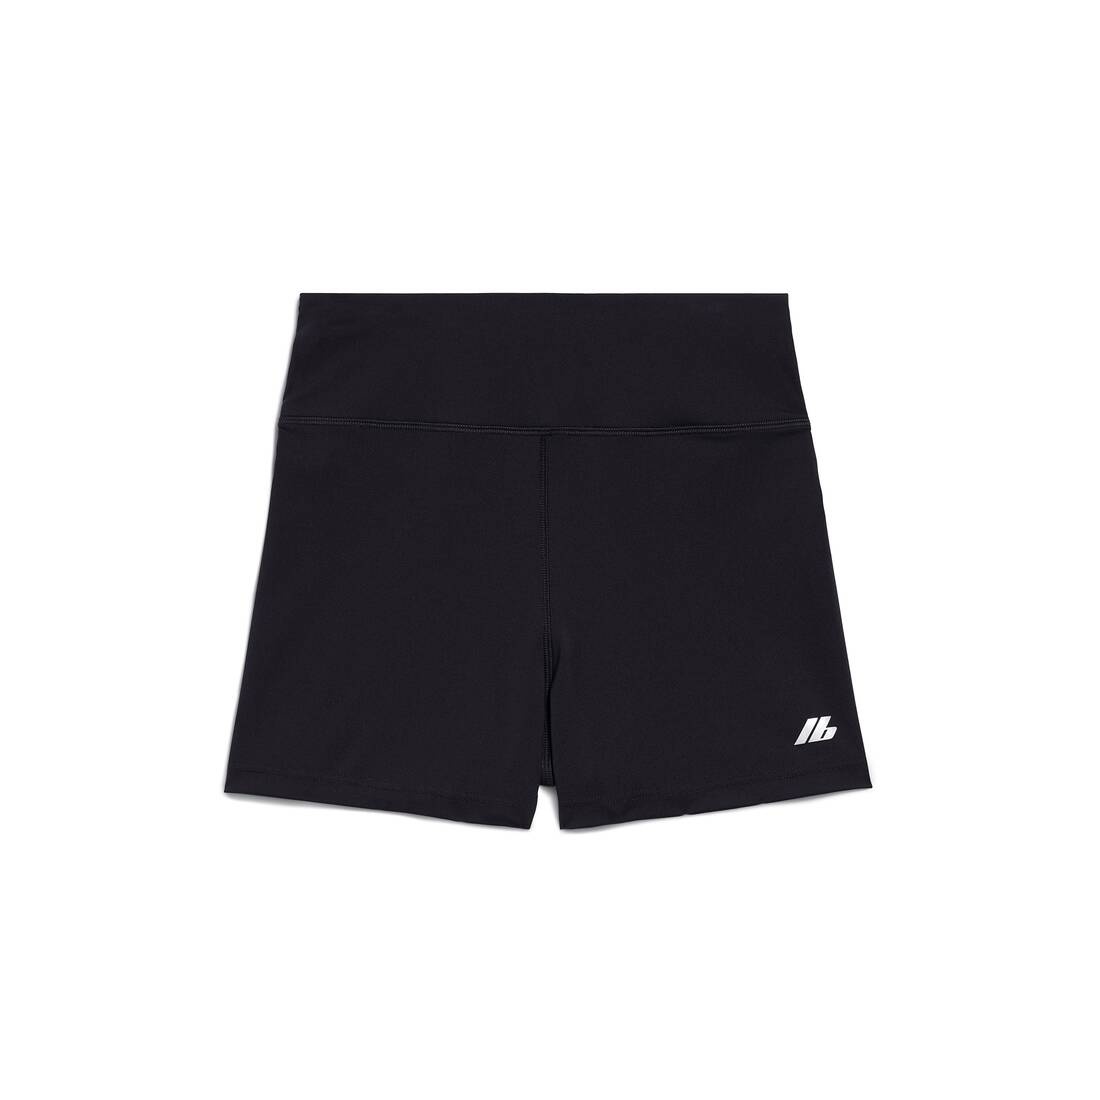 Women's Activewear Cycling Shorts in Black - 1